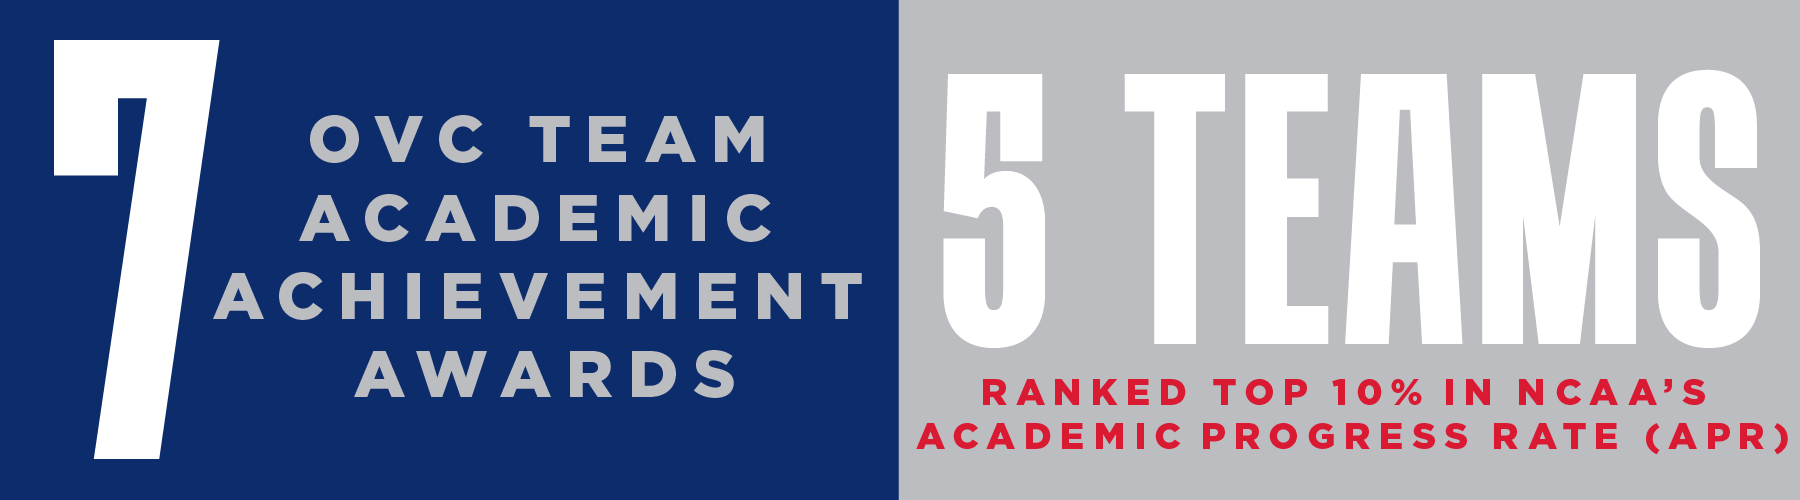 7 OVC Academic Achievement Awards, 5 Teams Ranked Top 10% in NCAA's Academic Progress Rate (APR)